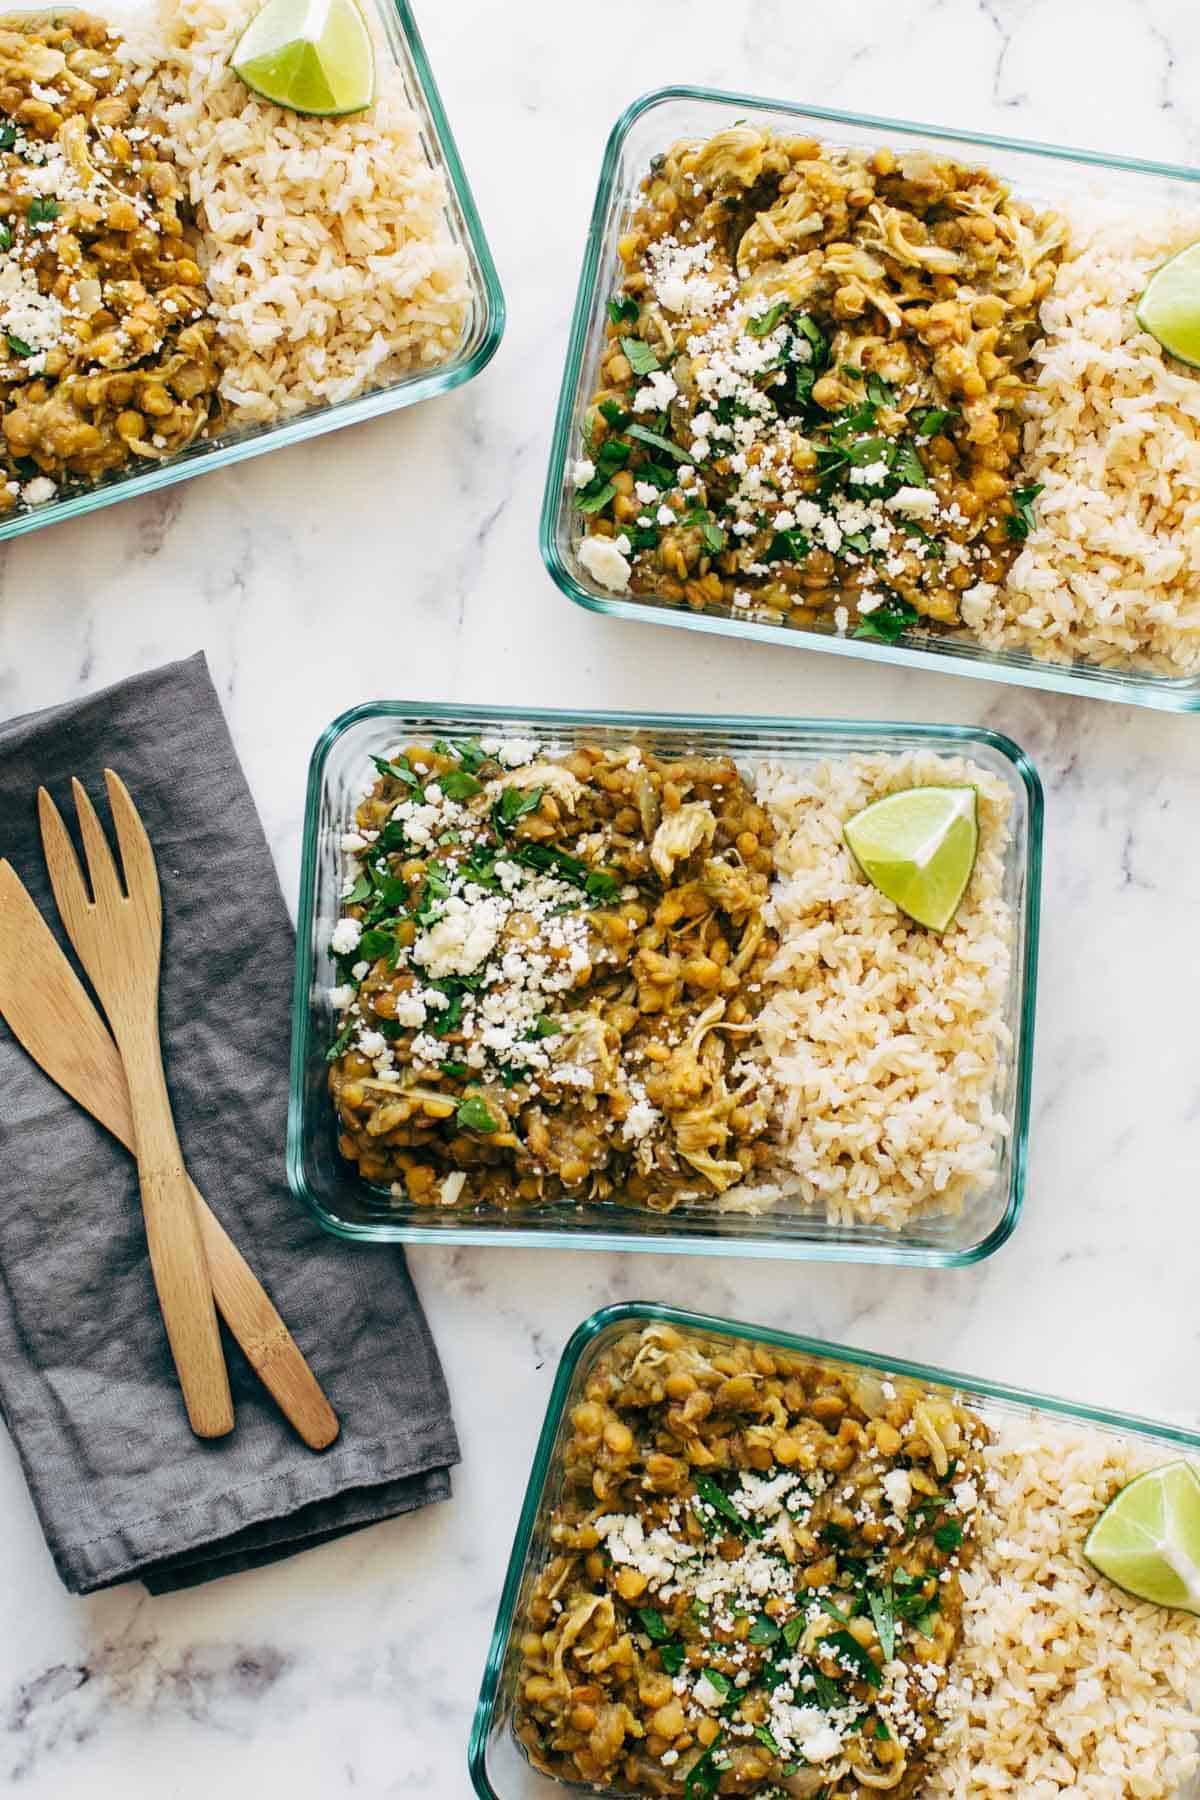 Cilantro Lime Chicken and Lentils meal prep in containers.